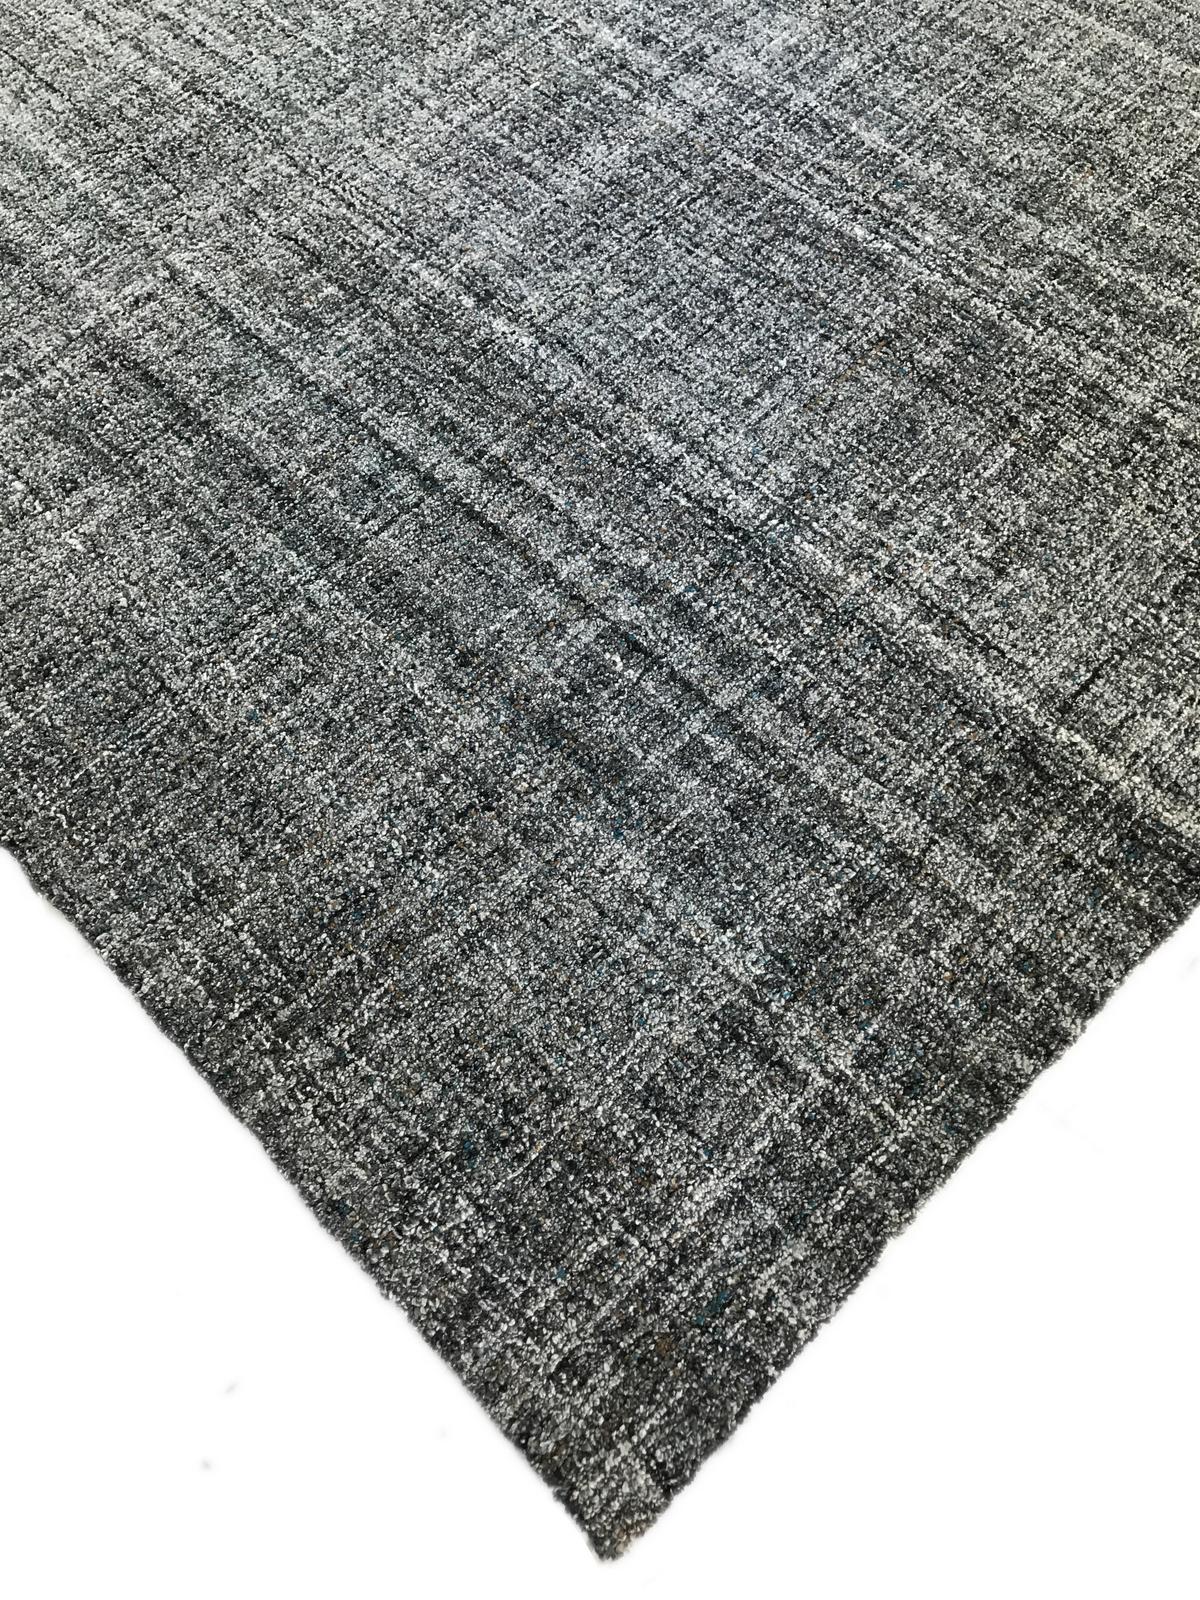 There's definitely more to this rug than meets the eye! At first glance this rug appears to be a straight forward blend of black, grey and silver but a closer look reveals turquoise, gold and other colors scattered throughout like gemstones in